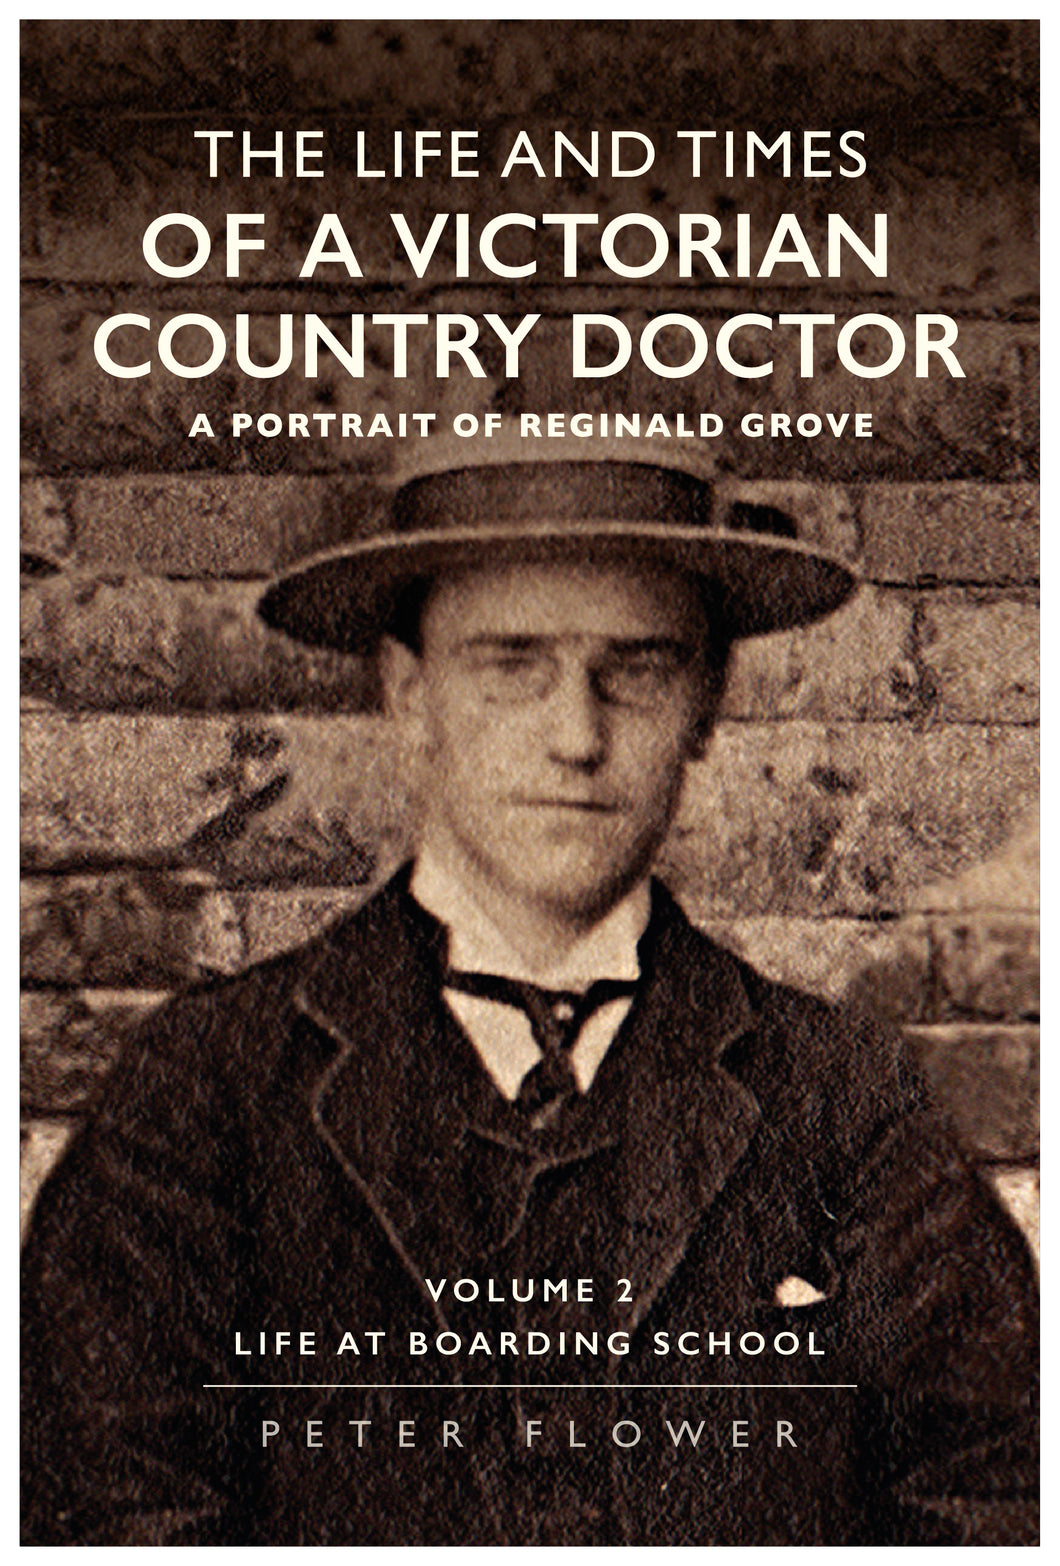 The Life and Times Of A Victorian Country Doctor - A Portrait of Reginald Grove Volume 2; Life at Boarding School - Peter Flower